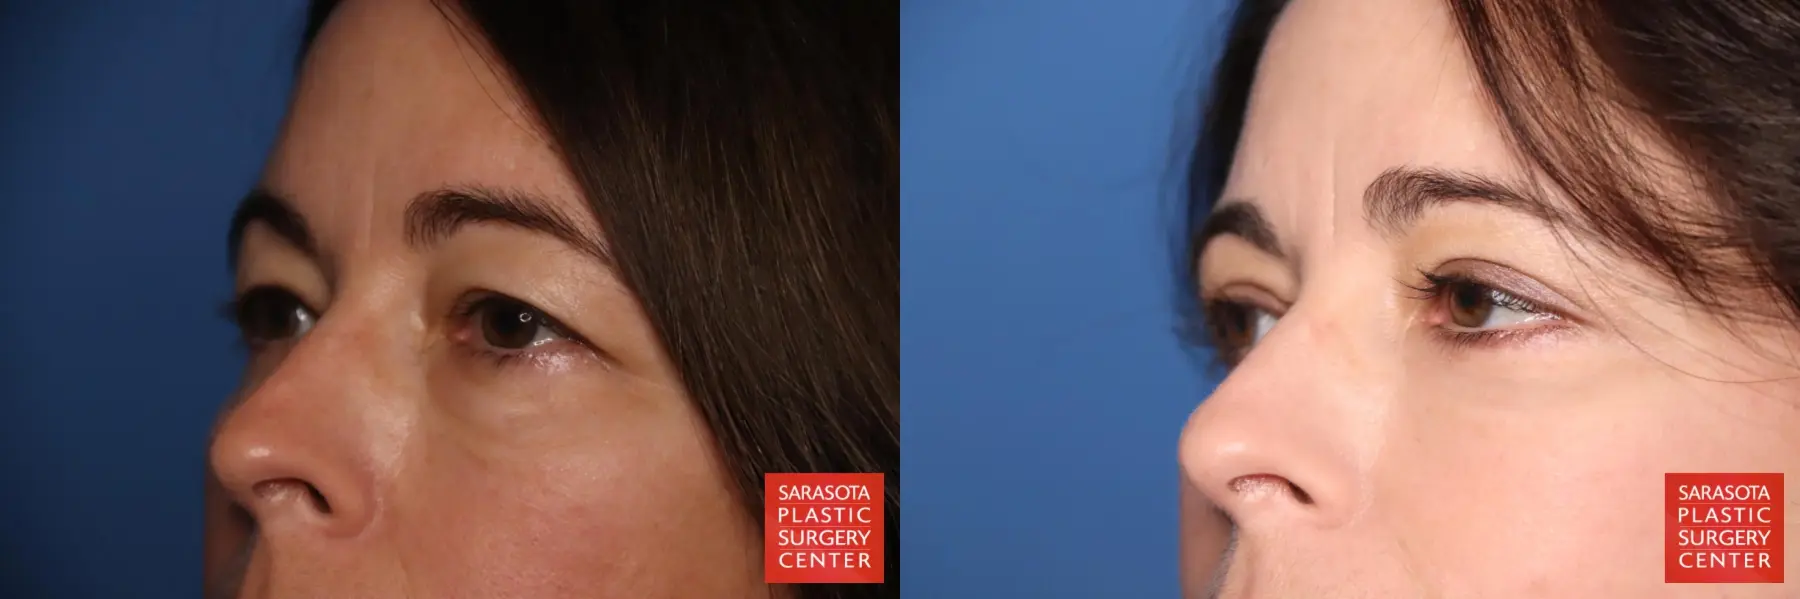 Eyelid Lift: Patient 3 - Before and After 4